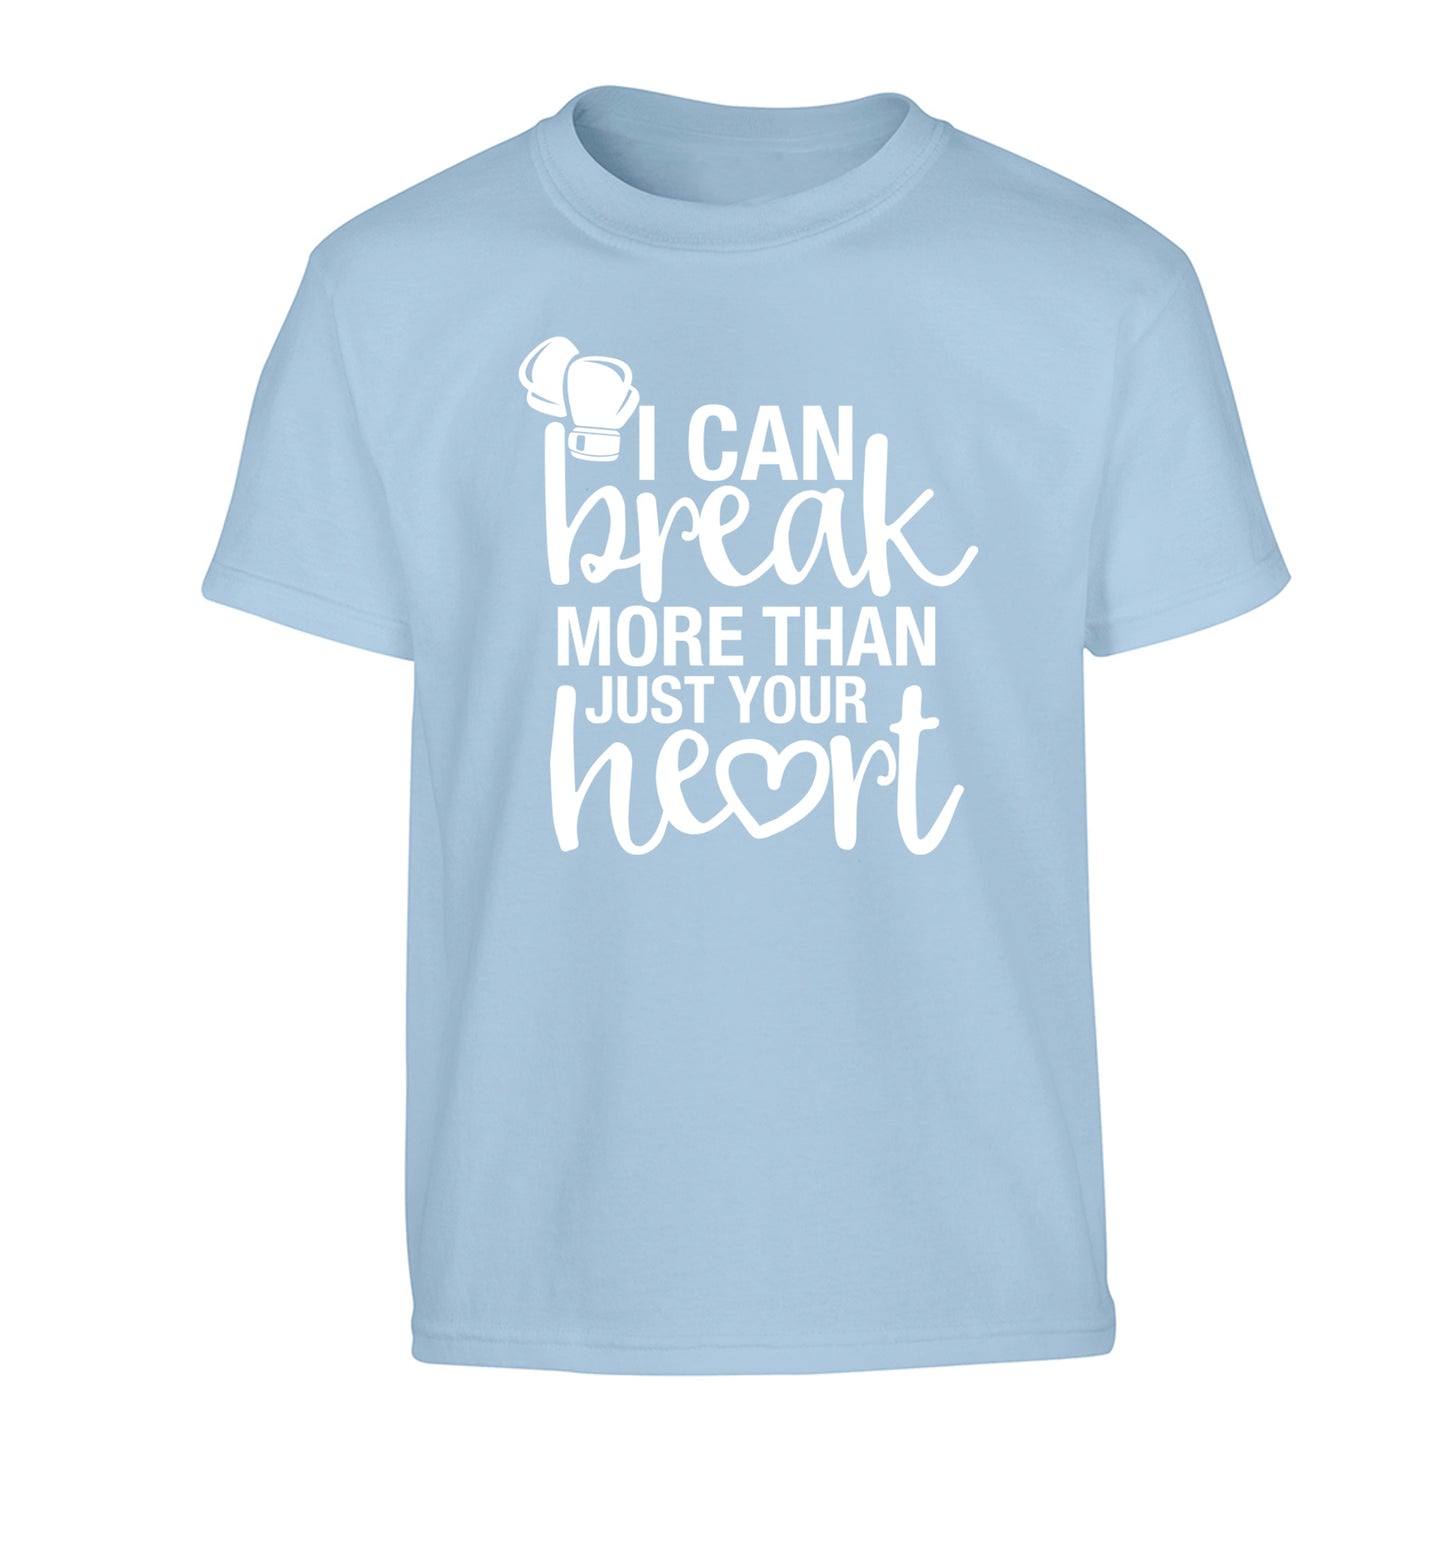 I can break more than just your heart Children's light blue Tshirt 12-13 Years